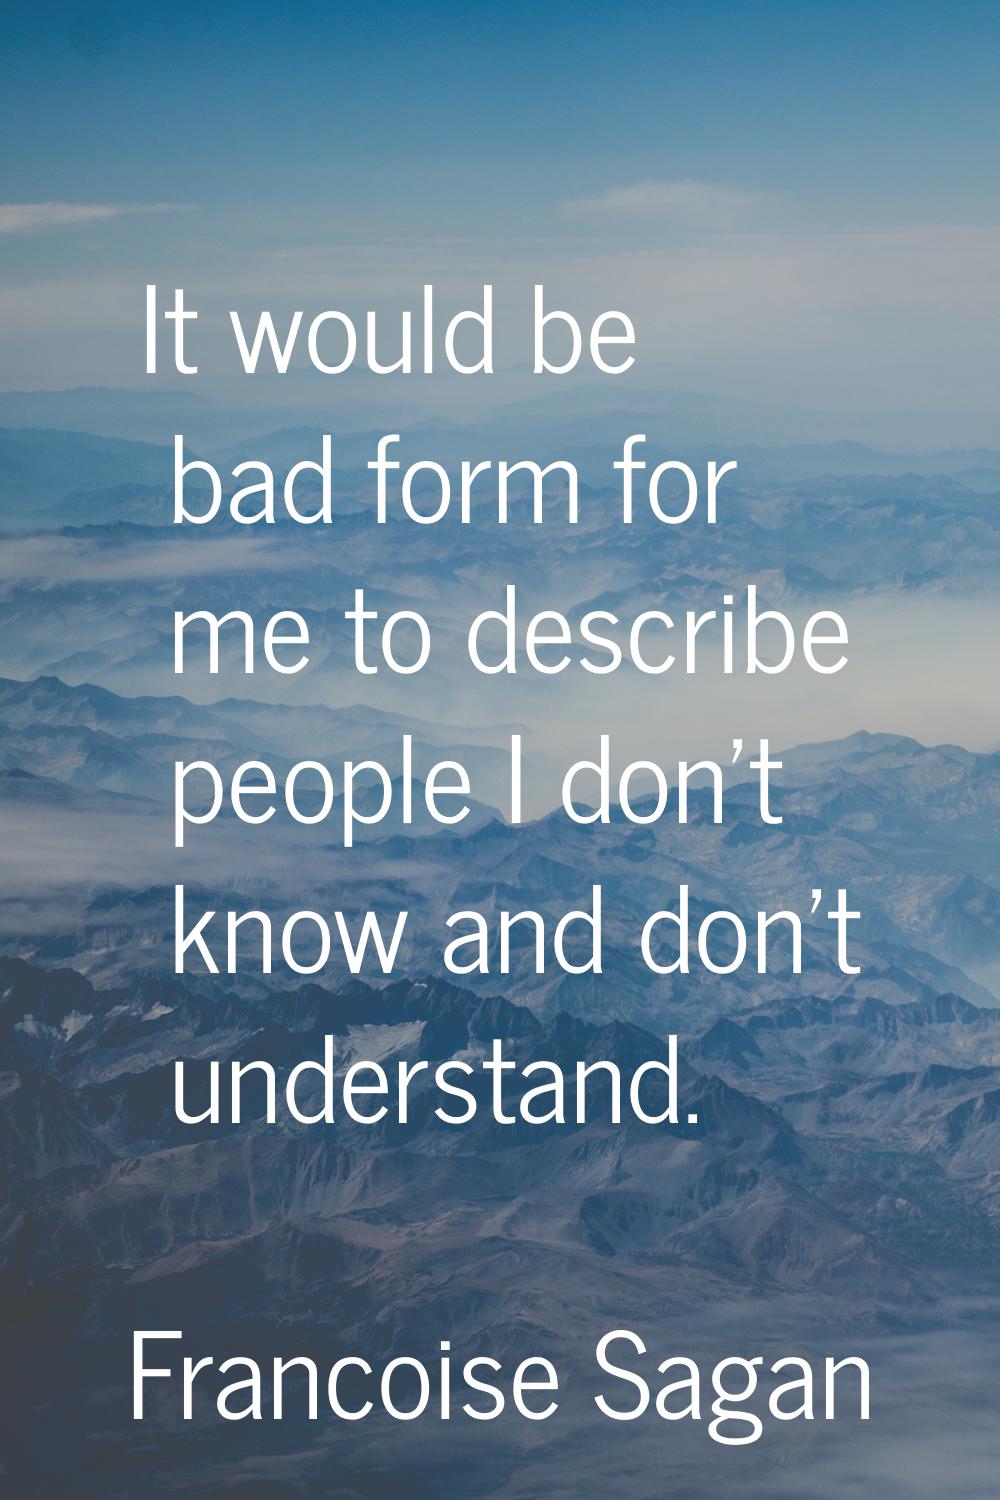 It would be bad form for me to describe people I don't know and don't understand.